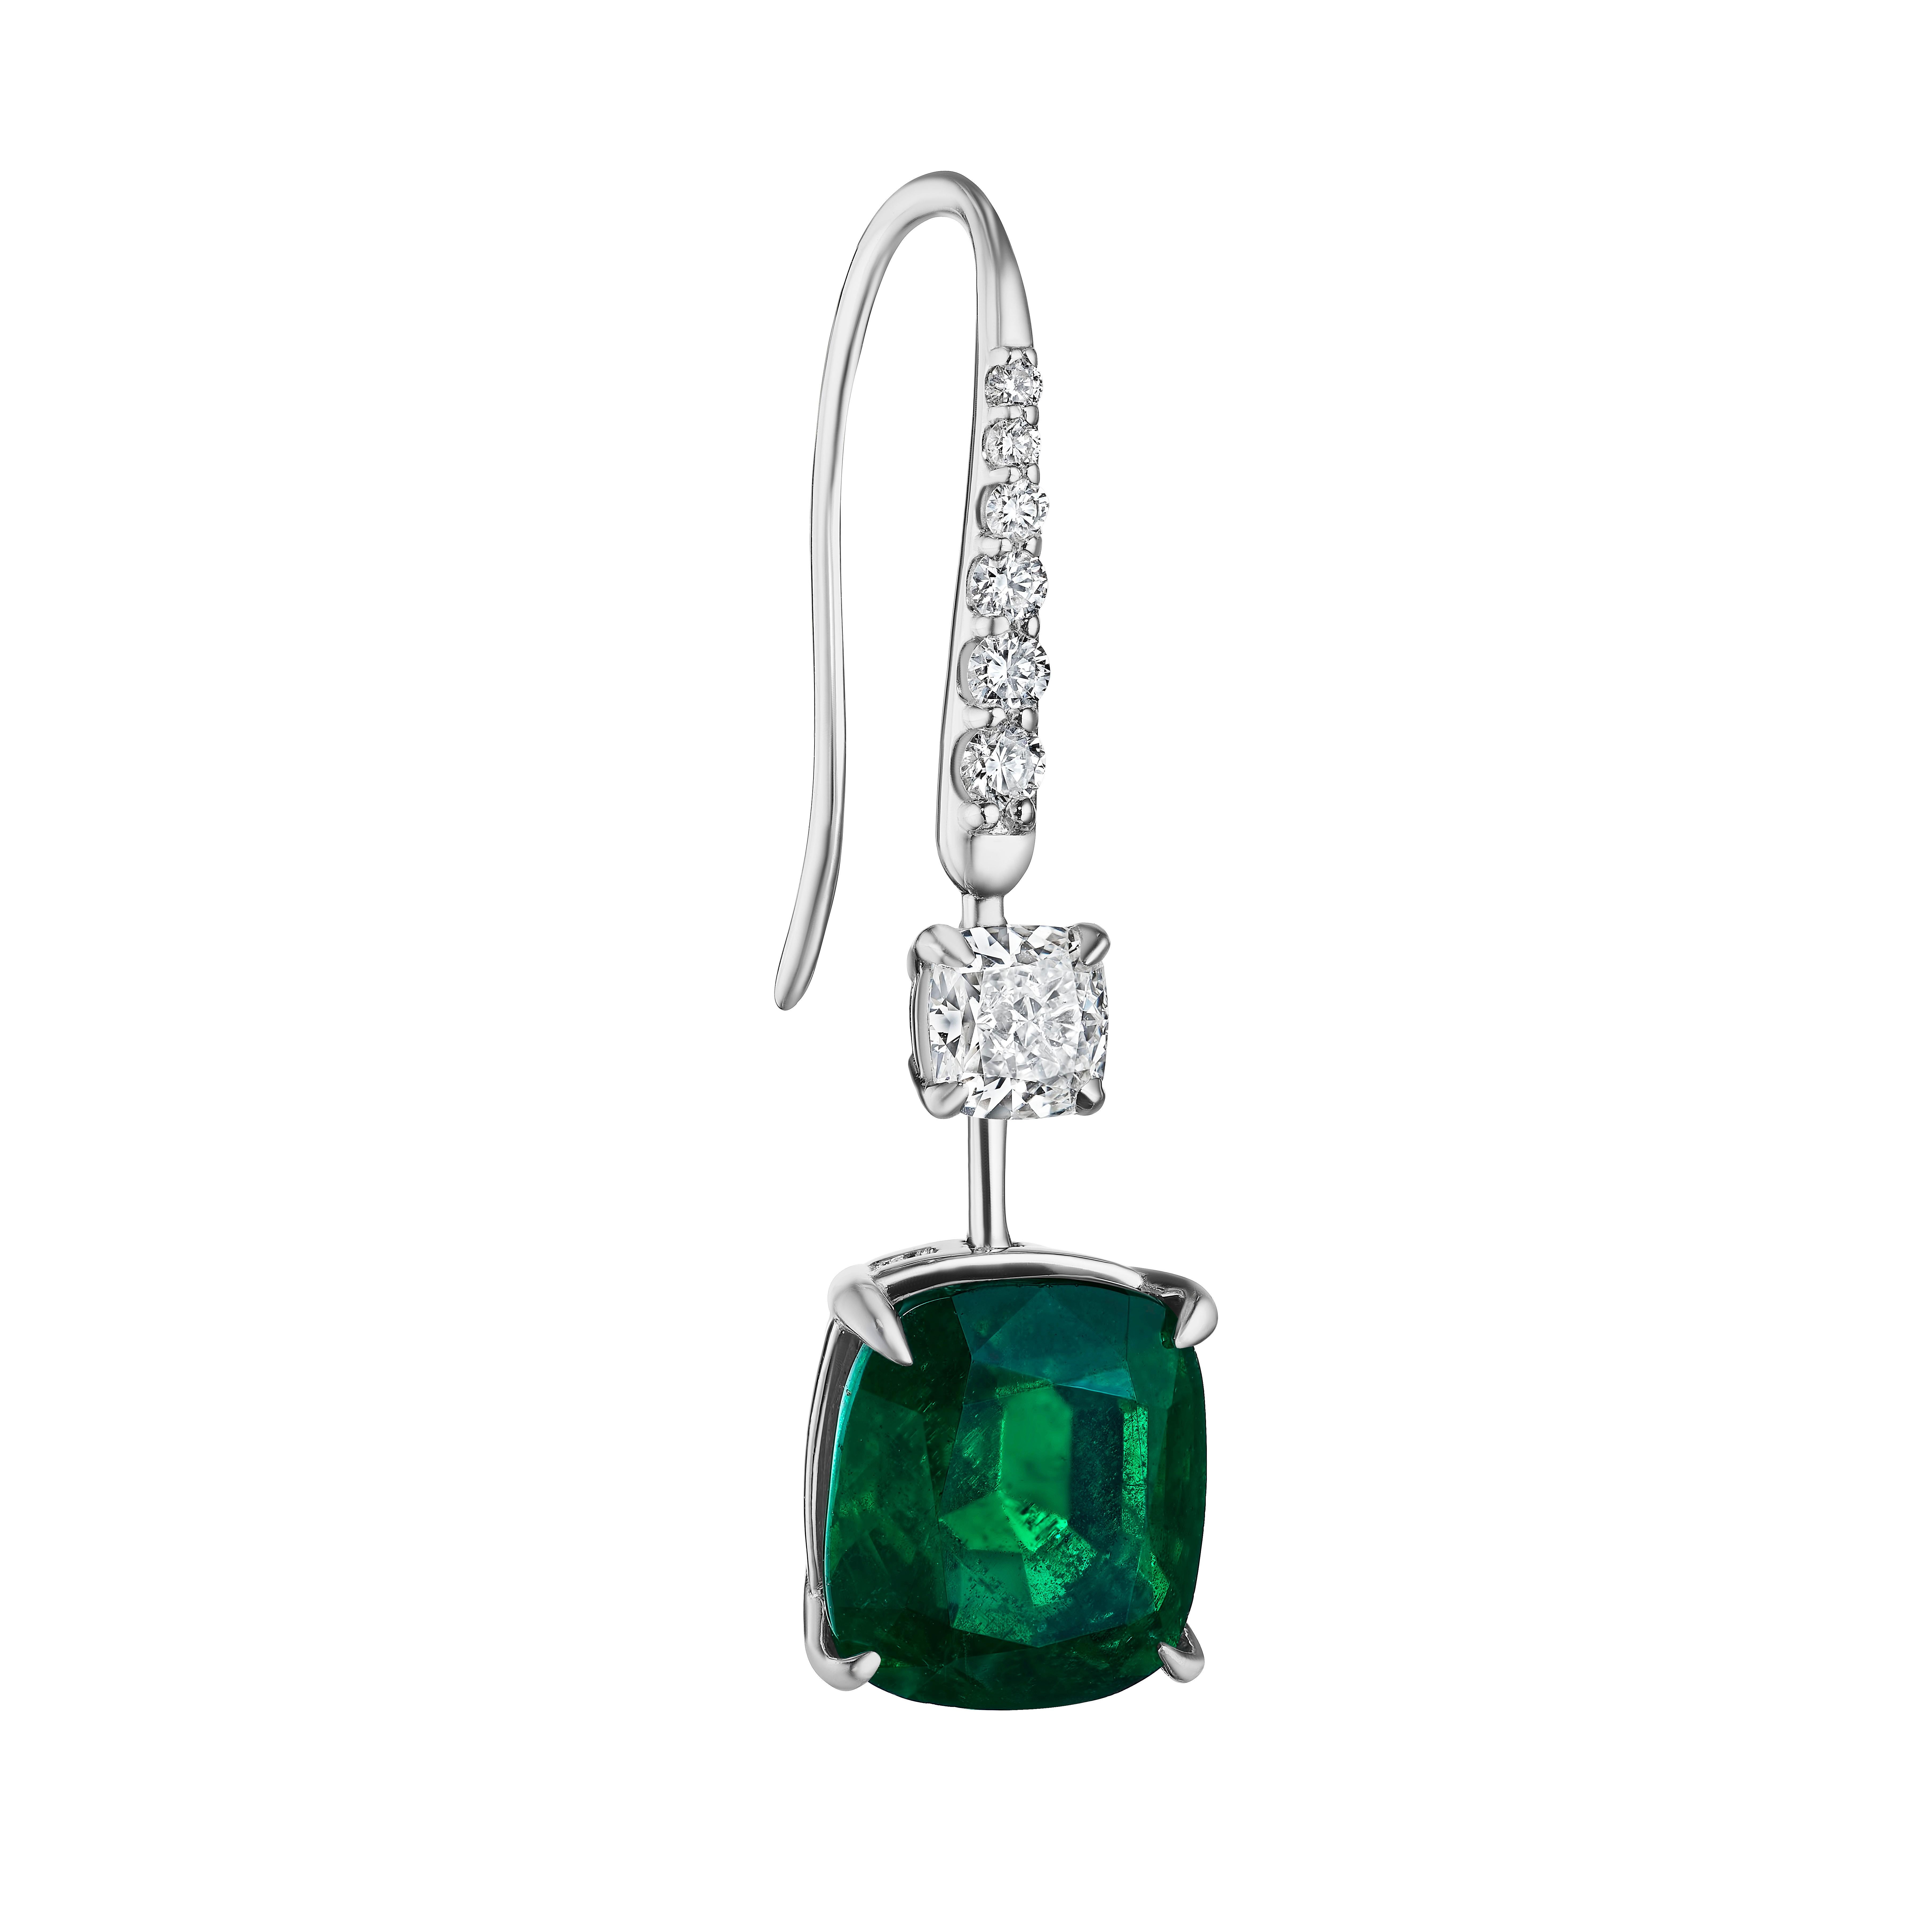 •	18KT White Gold
•	9.96 Carats
•	Sold as a pair

•	Number of Cushion Emeralds: 2
•	Carat Weight: 8.62ctw
•	Measurements: 11 x 10mm

•	Number of Cushion Diamonds: 2
•	Carat Weight: 1.05ctw
•	Color: E-F
•	Clarity: SI1
•	GIA: 5326474846,